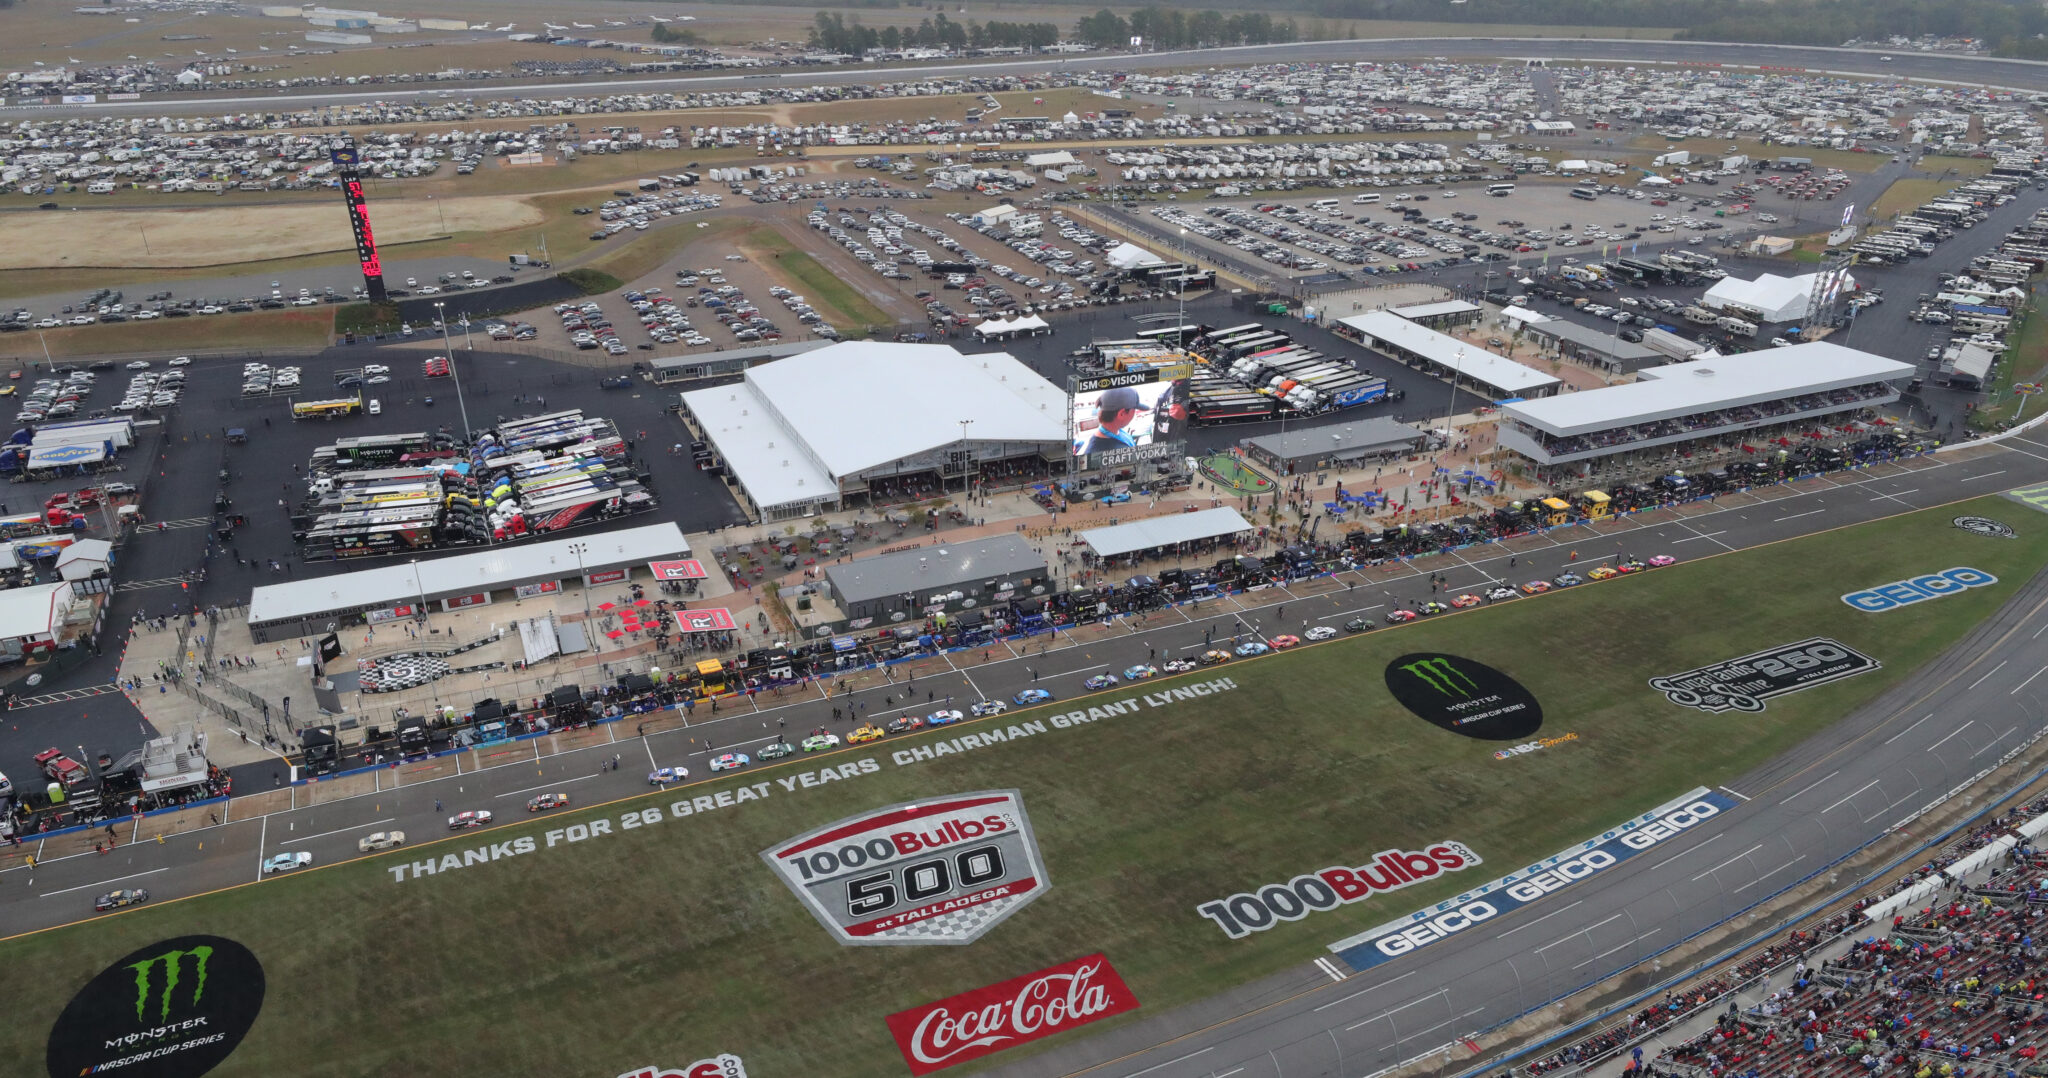 LocAL Flavor Construction of Talladega Superspeedway’s Transformation